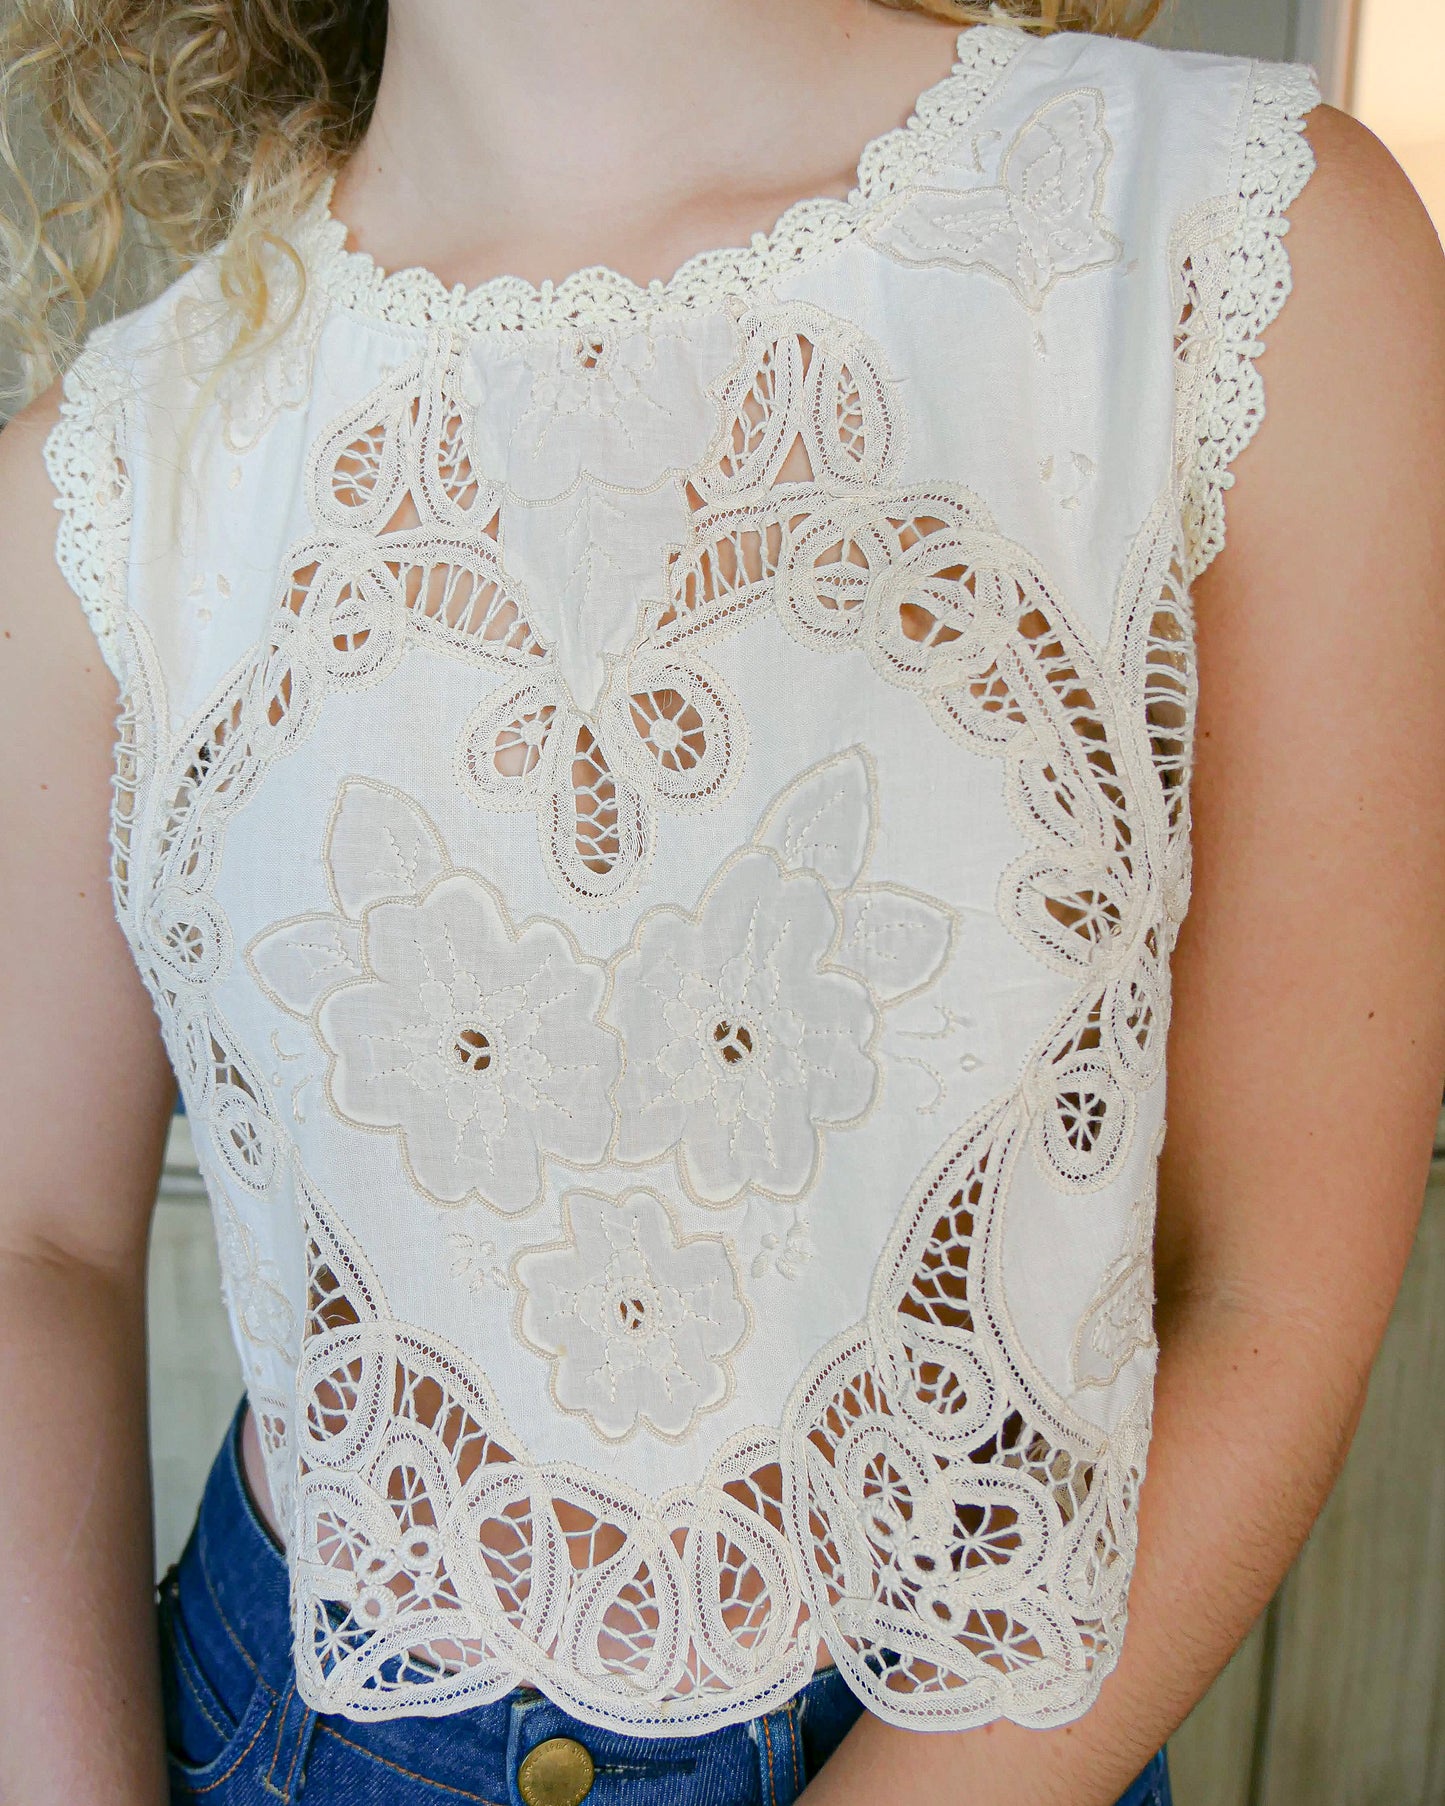 Romantic, boho chic, goes-with-everything crop tank top made with Lim's Vintage embroidered Battenberg lace fabric with a butterfly and floral motif. Goes well with jeans or denim skirt and cowboy boots or sandals.  